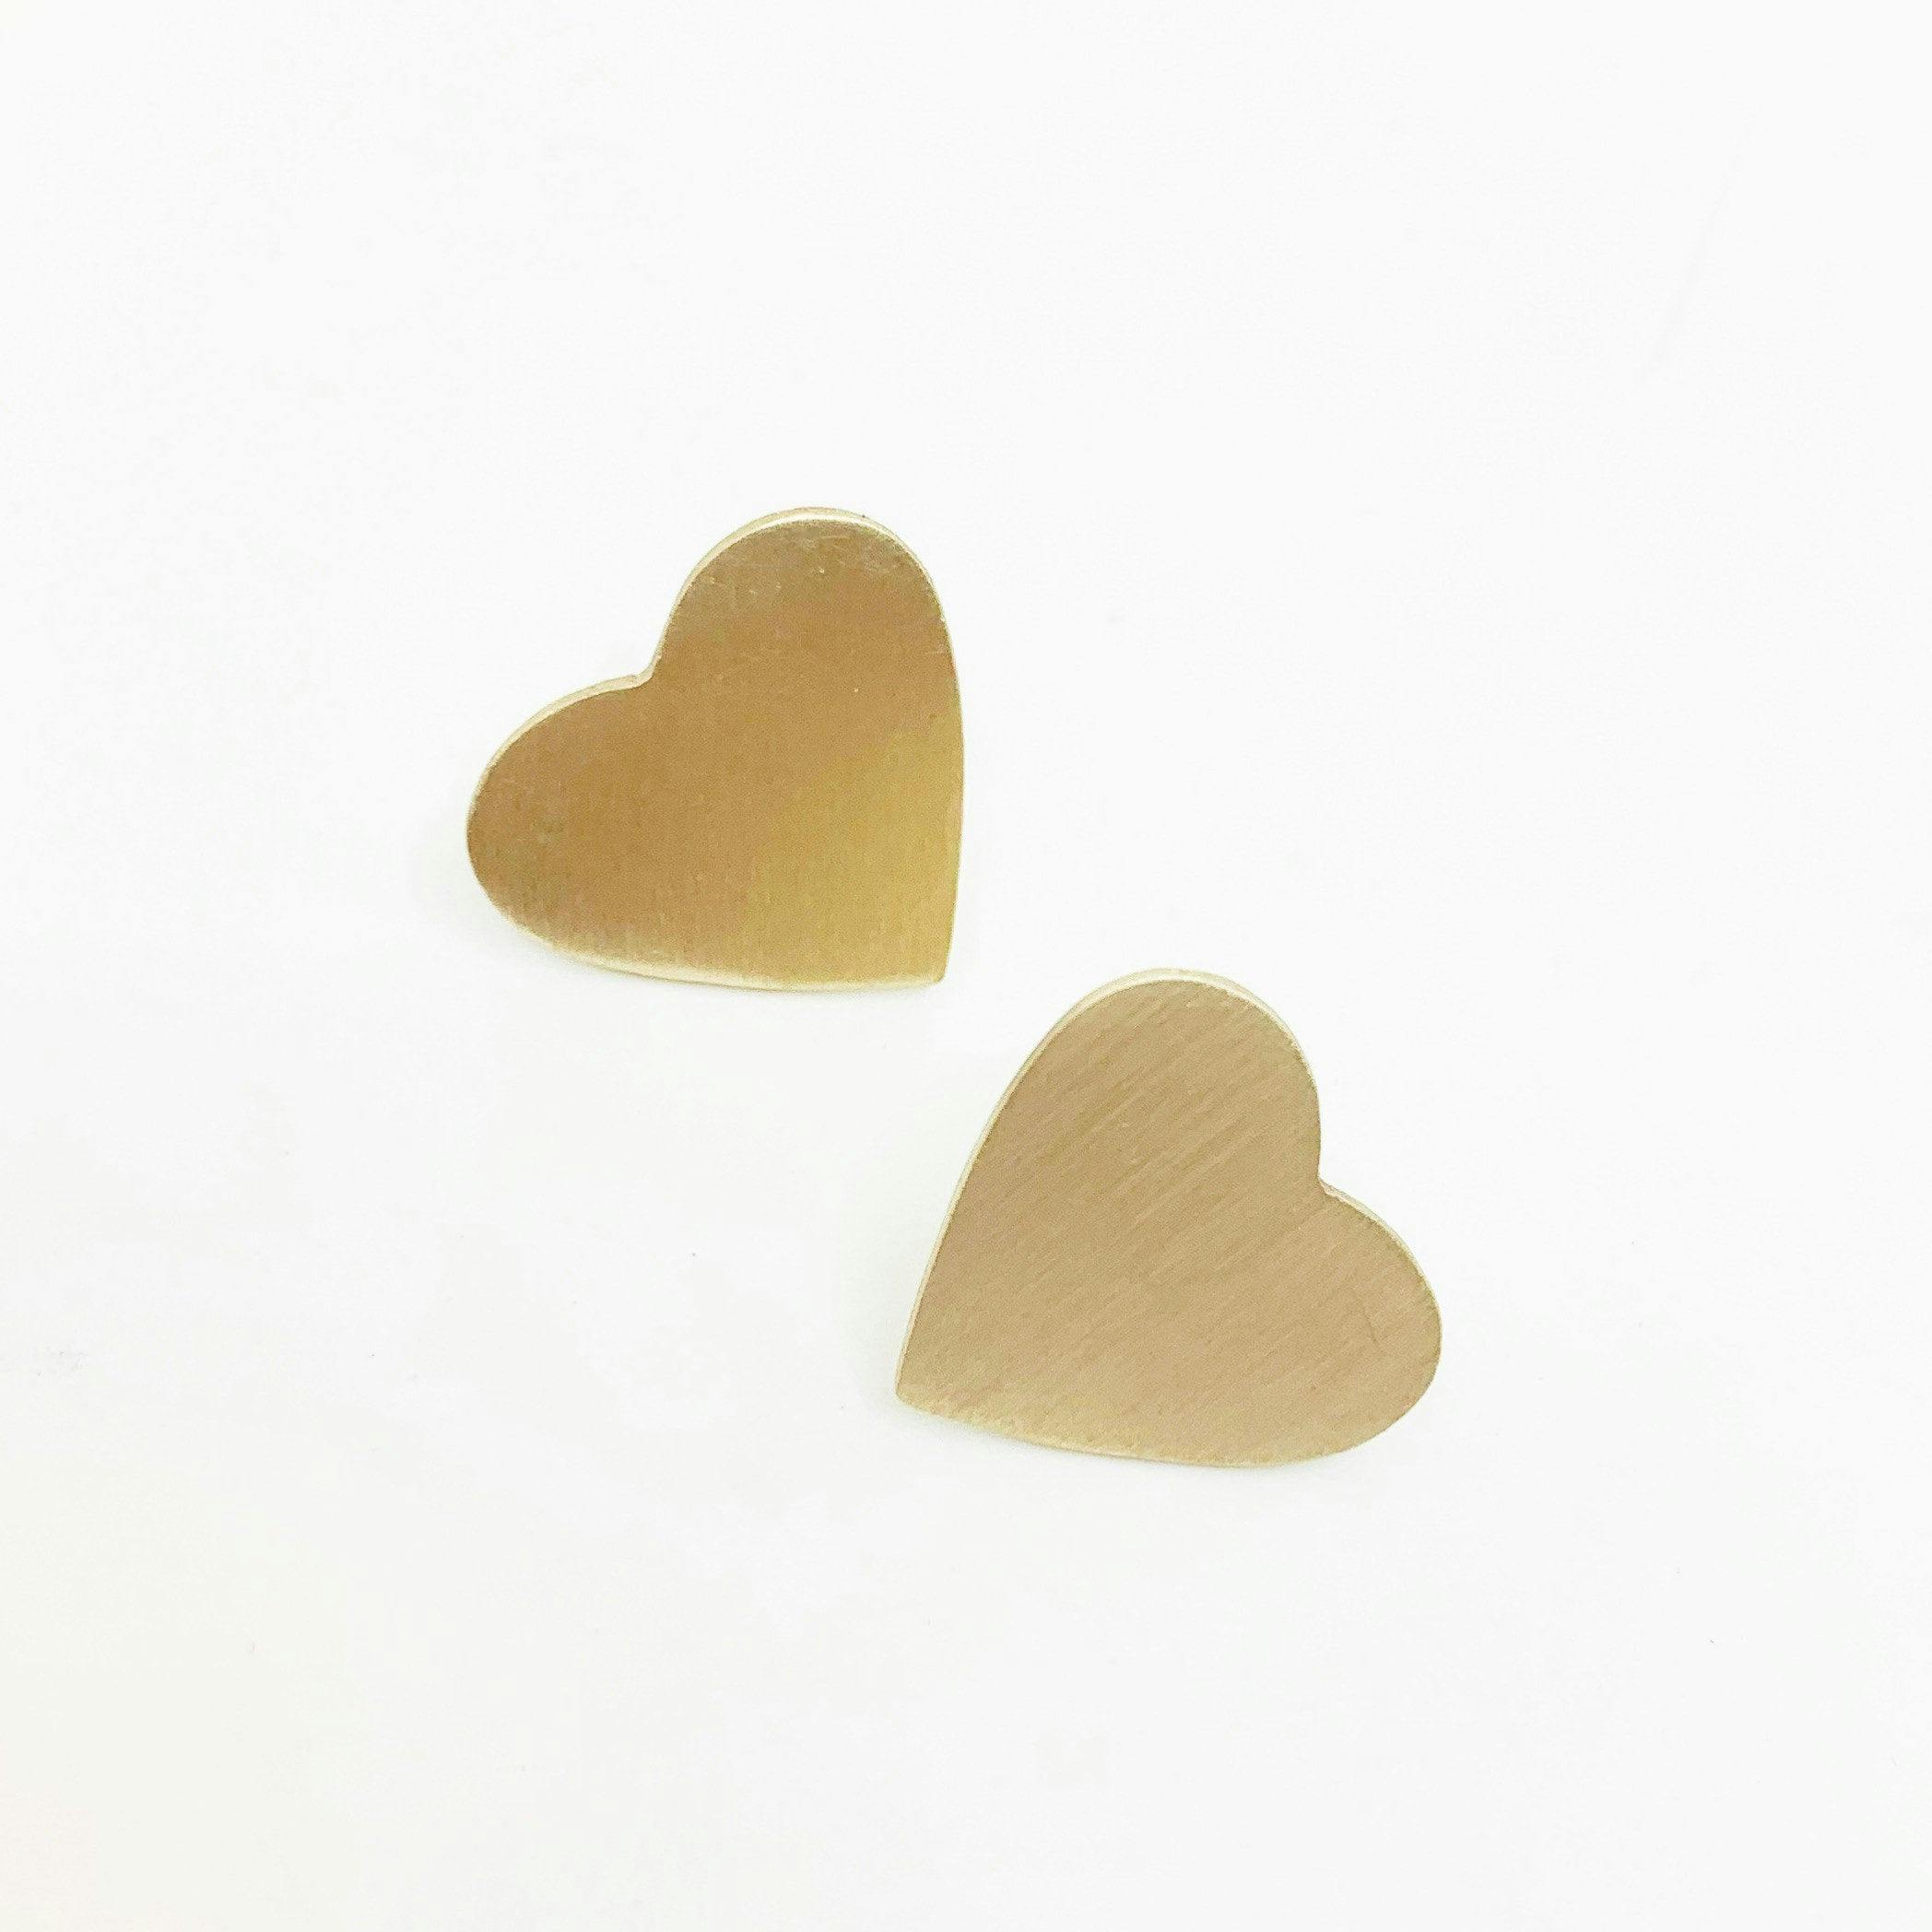 Venus Heart Studs, a product by Jenny Greco Jewellery